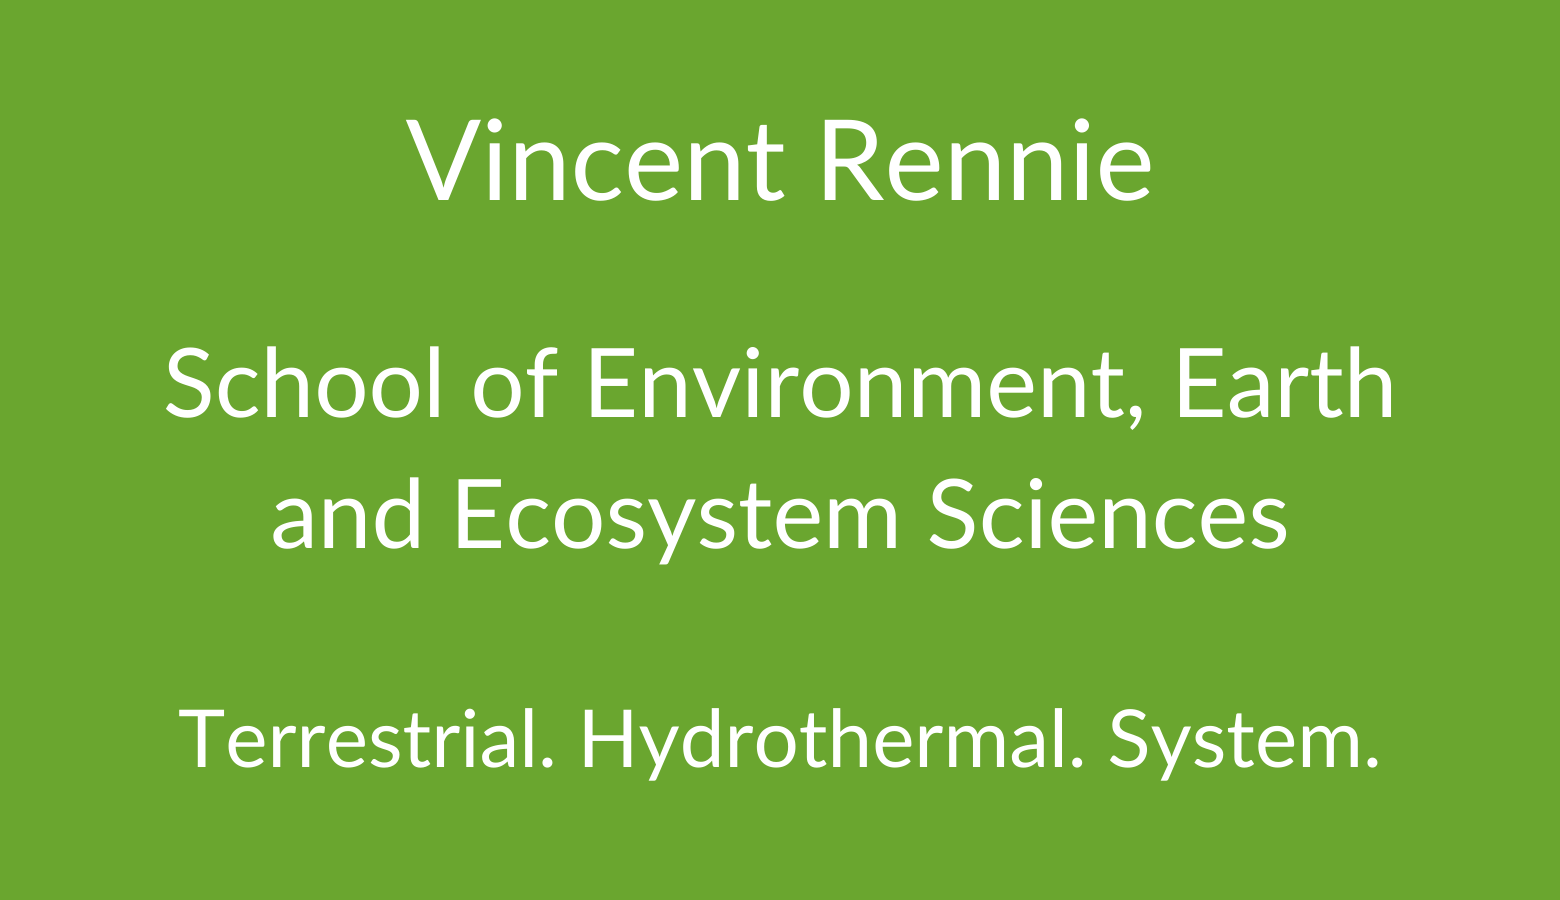 Vincent Rennie. School of Environment, Earth and Ecosystem Sciences. Terrestrial. Hydrothermal. System.